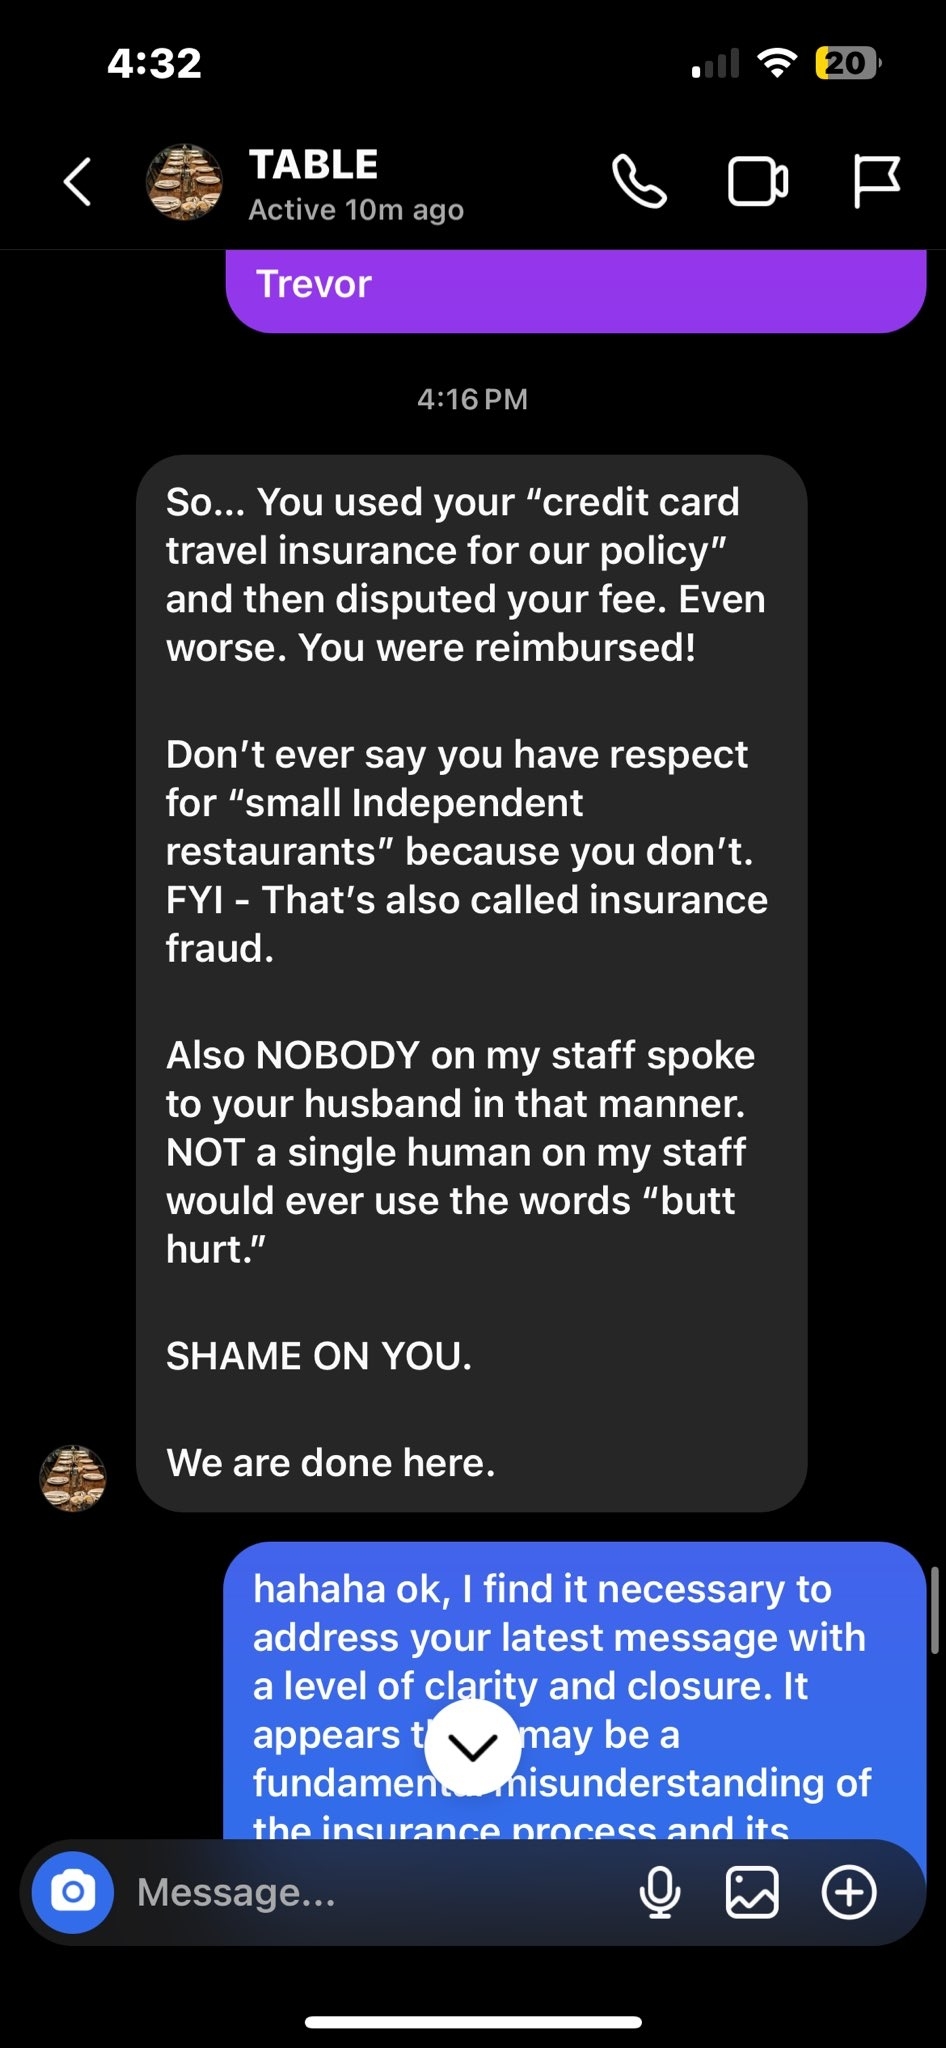 A message from Jen to Trevor accusing him of insurance fraud because he used his credit card travel insurance and then disputed the fee, and saying he never spoke to staff